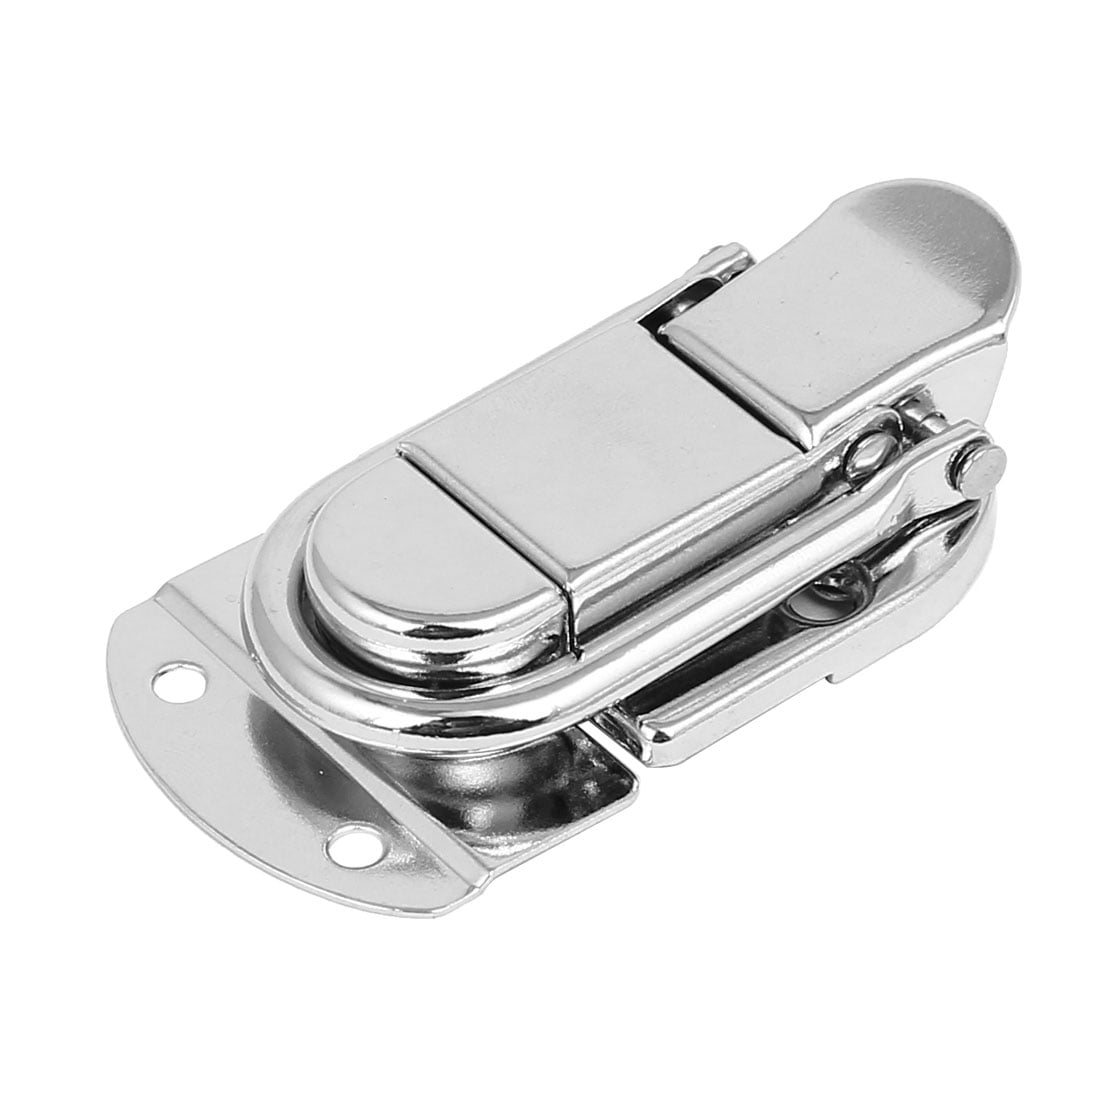 FemiaD Latches Suitcase Box Trunk Lock 86mm x 65mm Buckle Latches Catch Toggle Hasp 2PCS 